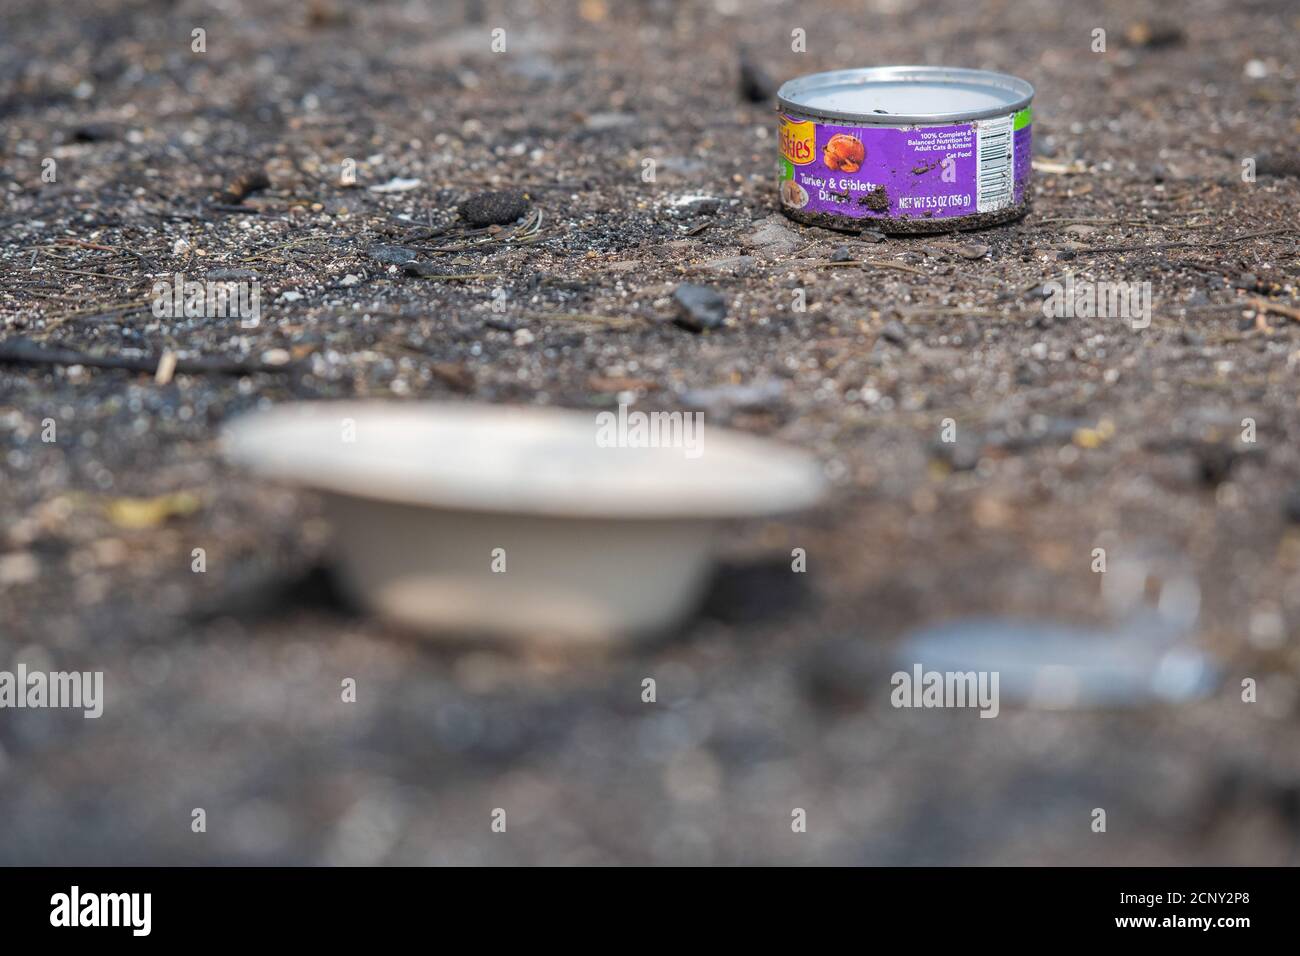 TALENT, ORE - SEPTEMBER 18, 2020: A general view of cat food left out for cats that are missing amid the aftermath of the Almeda Fire. The town of Talent, Oregon, showing the burned out homes, cars and rubble left behind. In Talent, about 20 miles north of the California border, homes were charred beyond recognition. Across the western US, at least 87 wildfires are burning, according to the National Interagency Fire Center. They've torched more than 4.7 million acres -- more than six times the area of Rhode Island. Credit: Chris Tuite/imageSPACE/Sipa USA Stock Photo